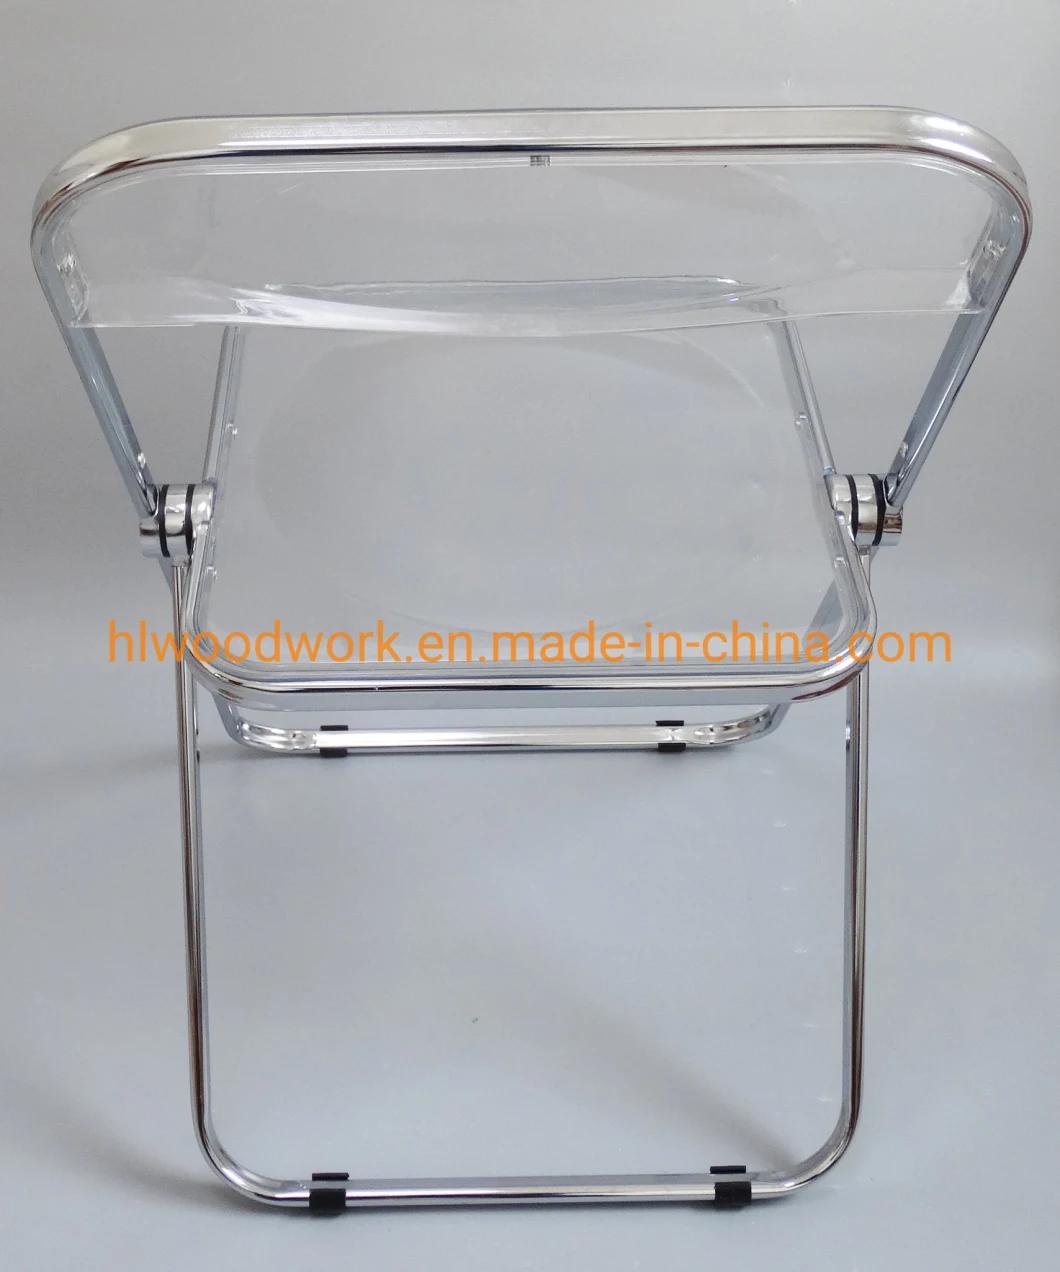 Modern Transparent Brown Folding Chair PC Plastic Dining Room Chair Chrome Frame Office Bar Dining Leisure Banquet Wedding Meeting Chair Plastic Dining Chair